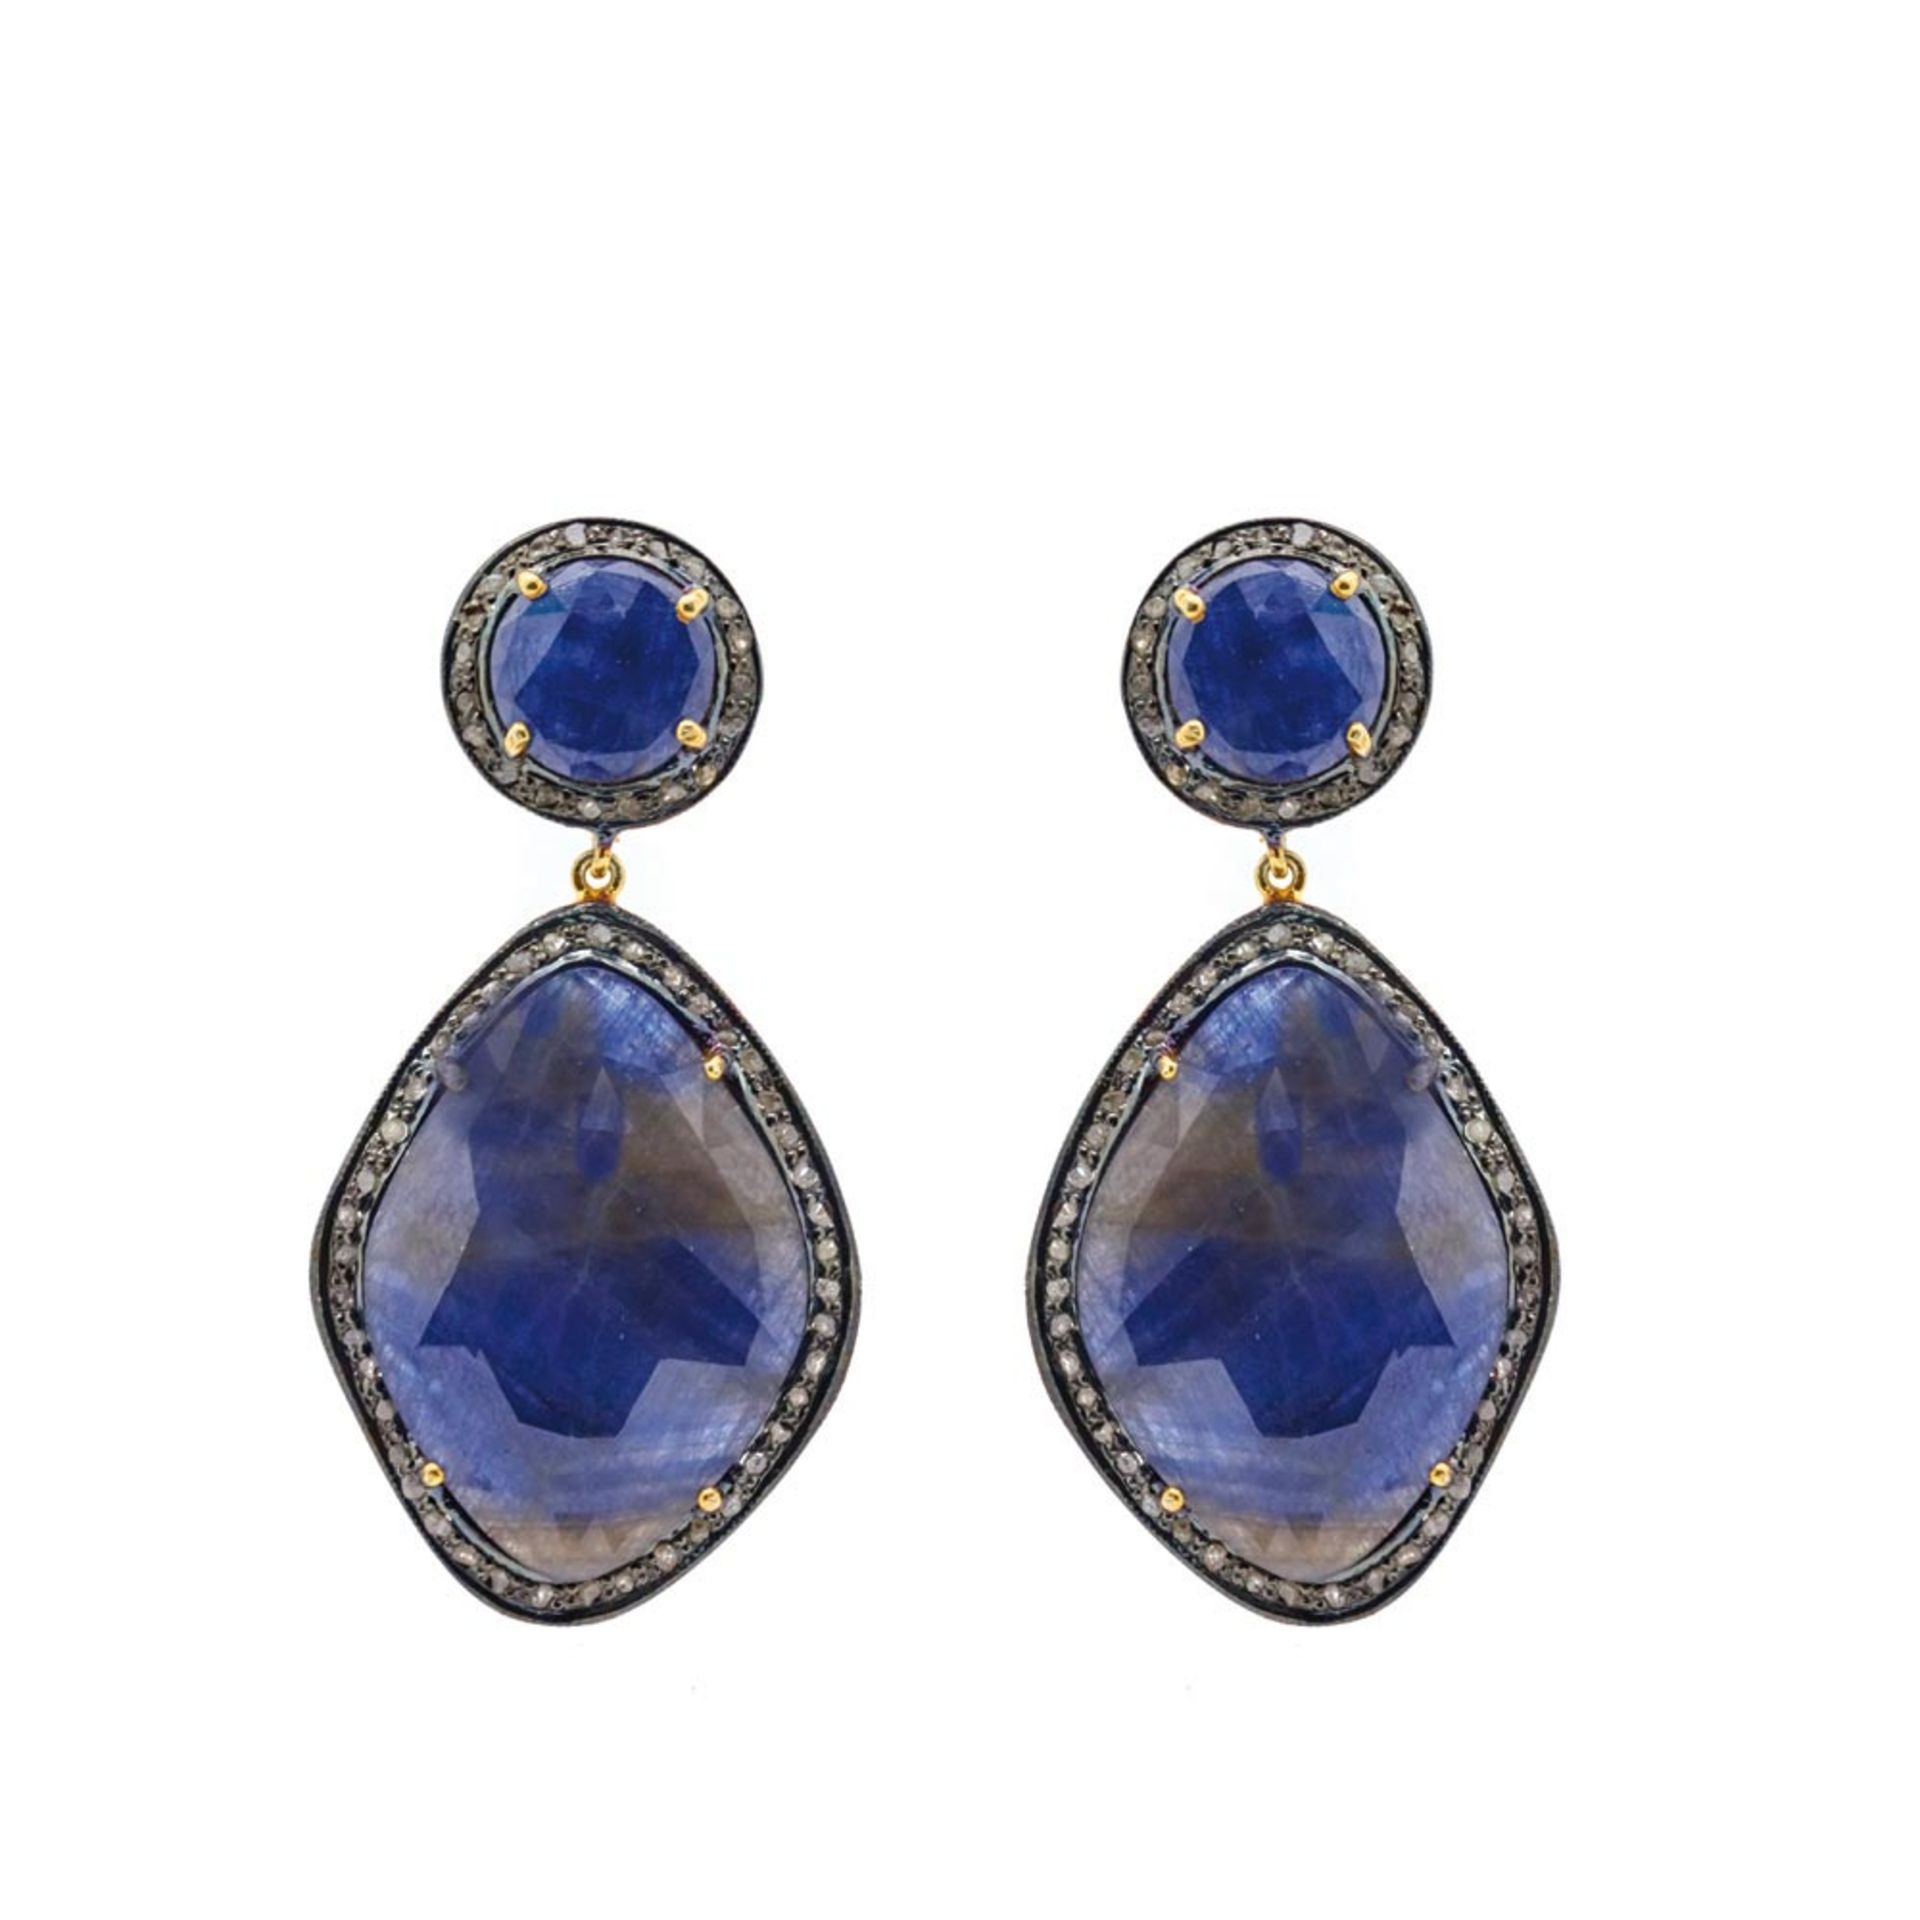 Bluing and gold plated silver, sapphires and diamonds earrings